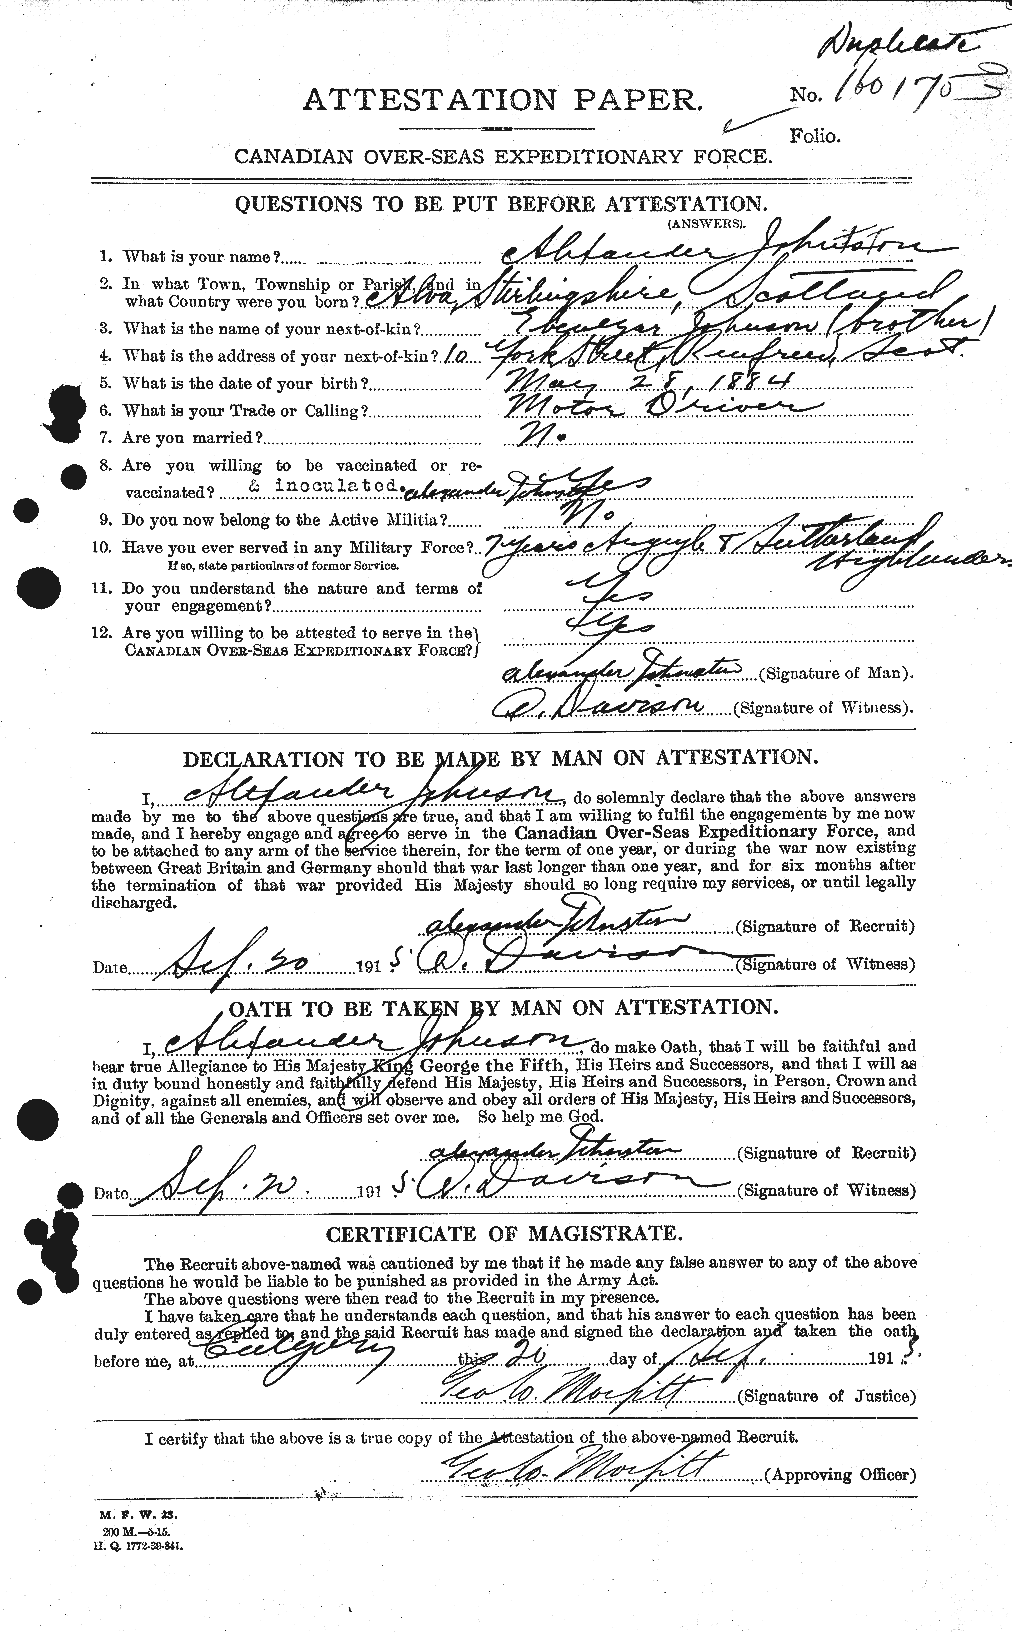 Personnel Records of the First World War - CEF 420958a